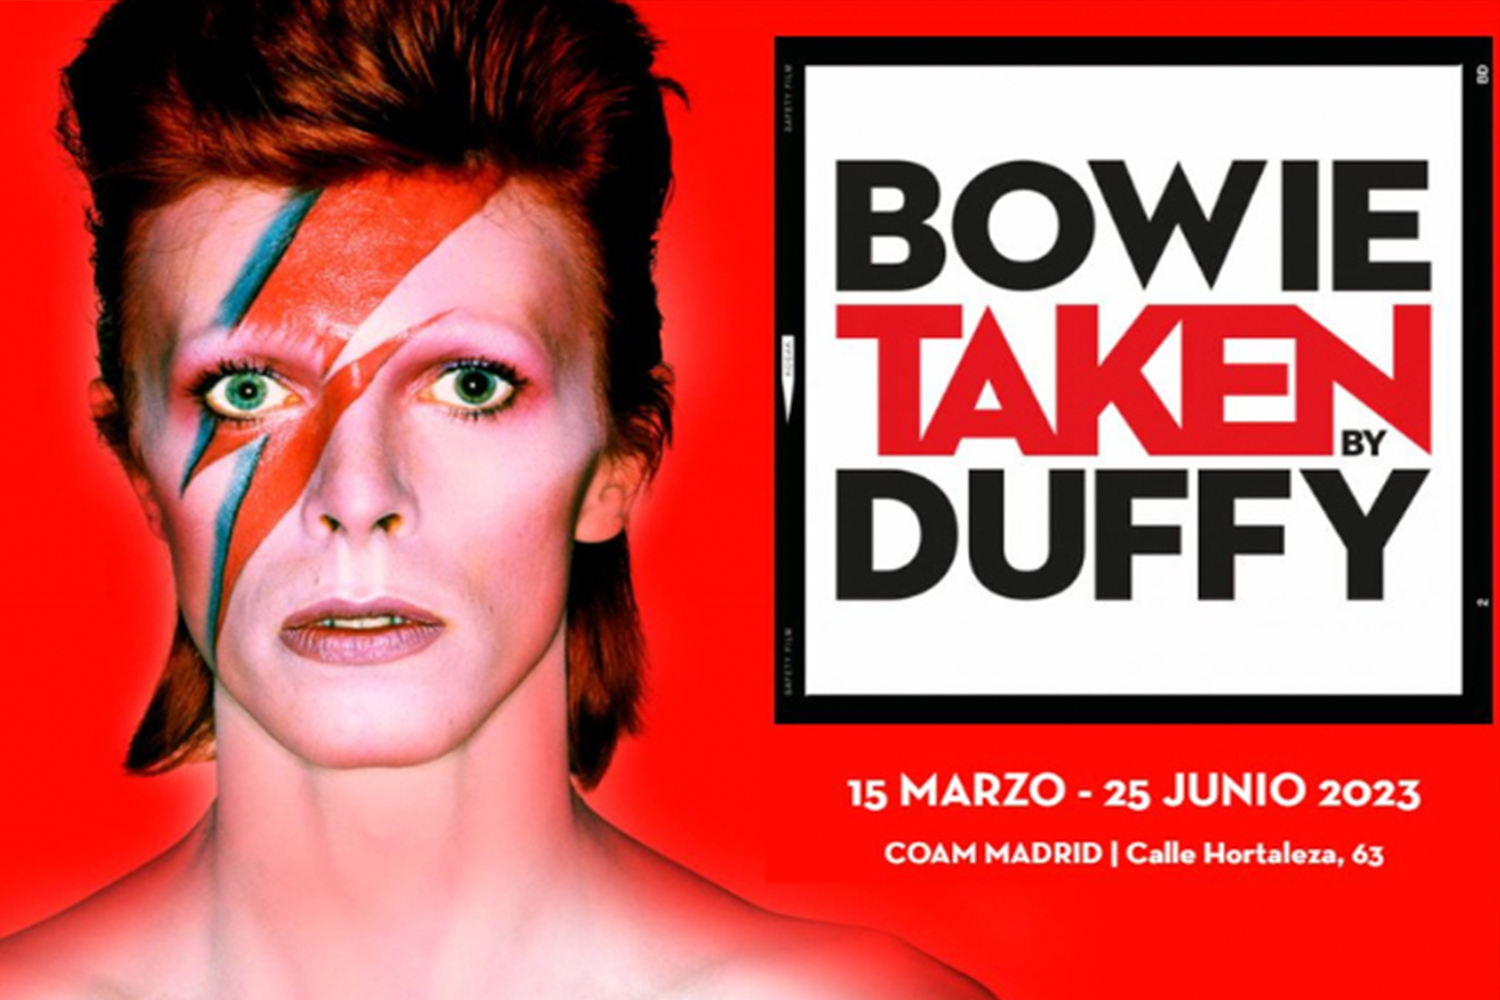 Exposición ¨Bowie Taken by Duffy¨